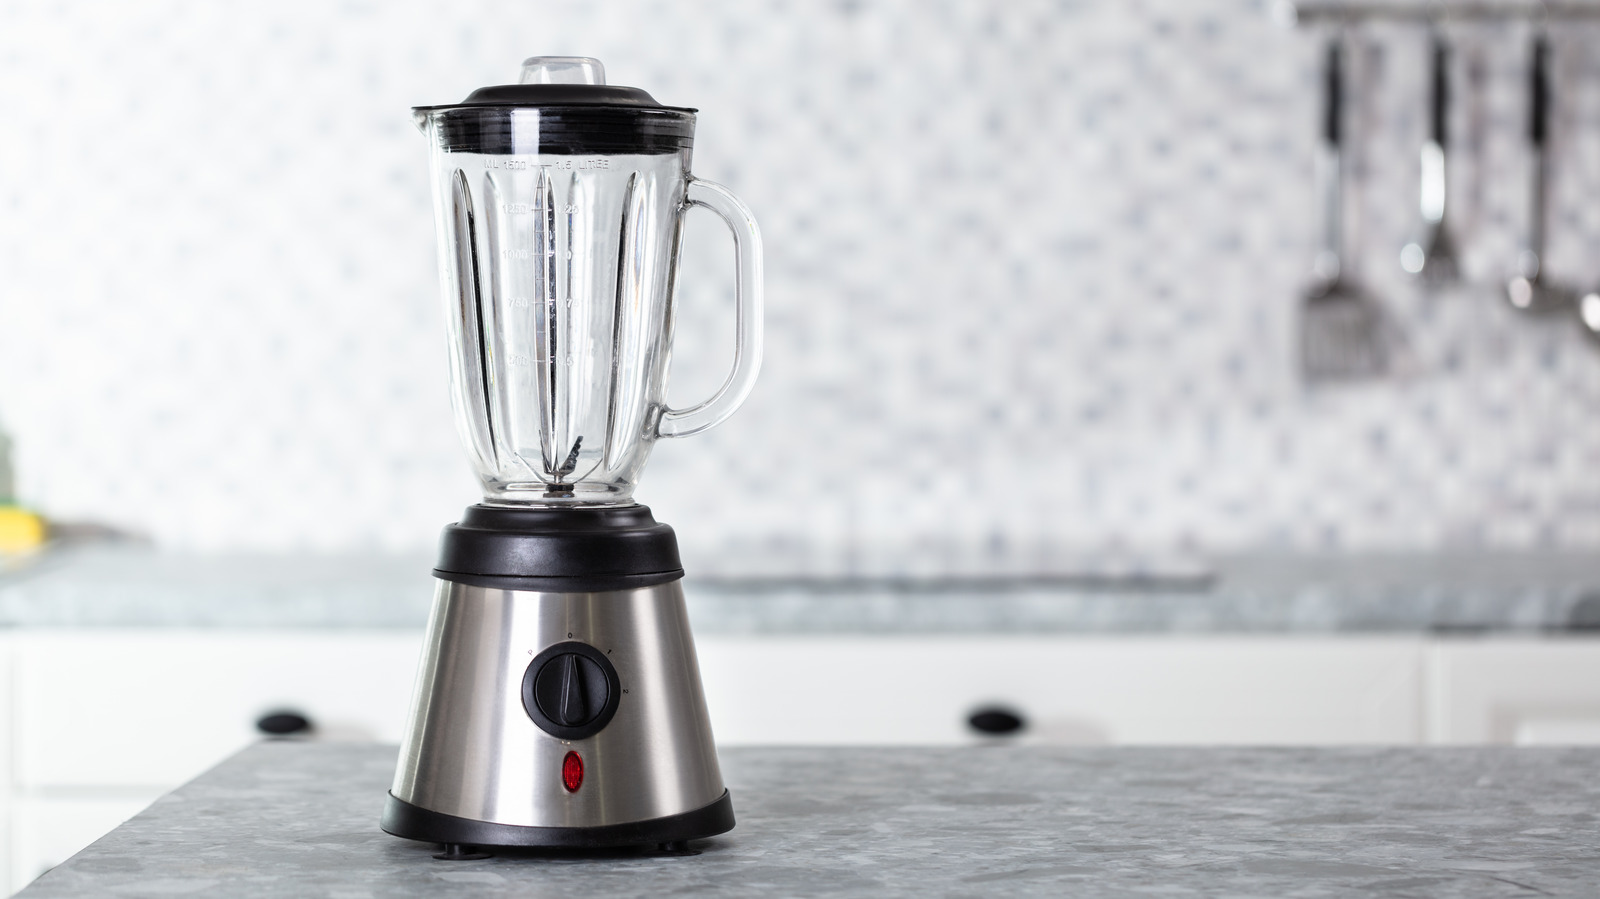 You May Want To Think Twice Before Putting Whole Nuts In The Blender